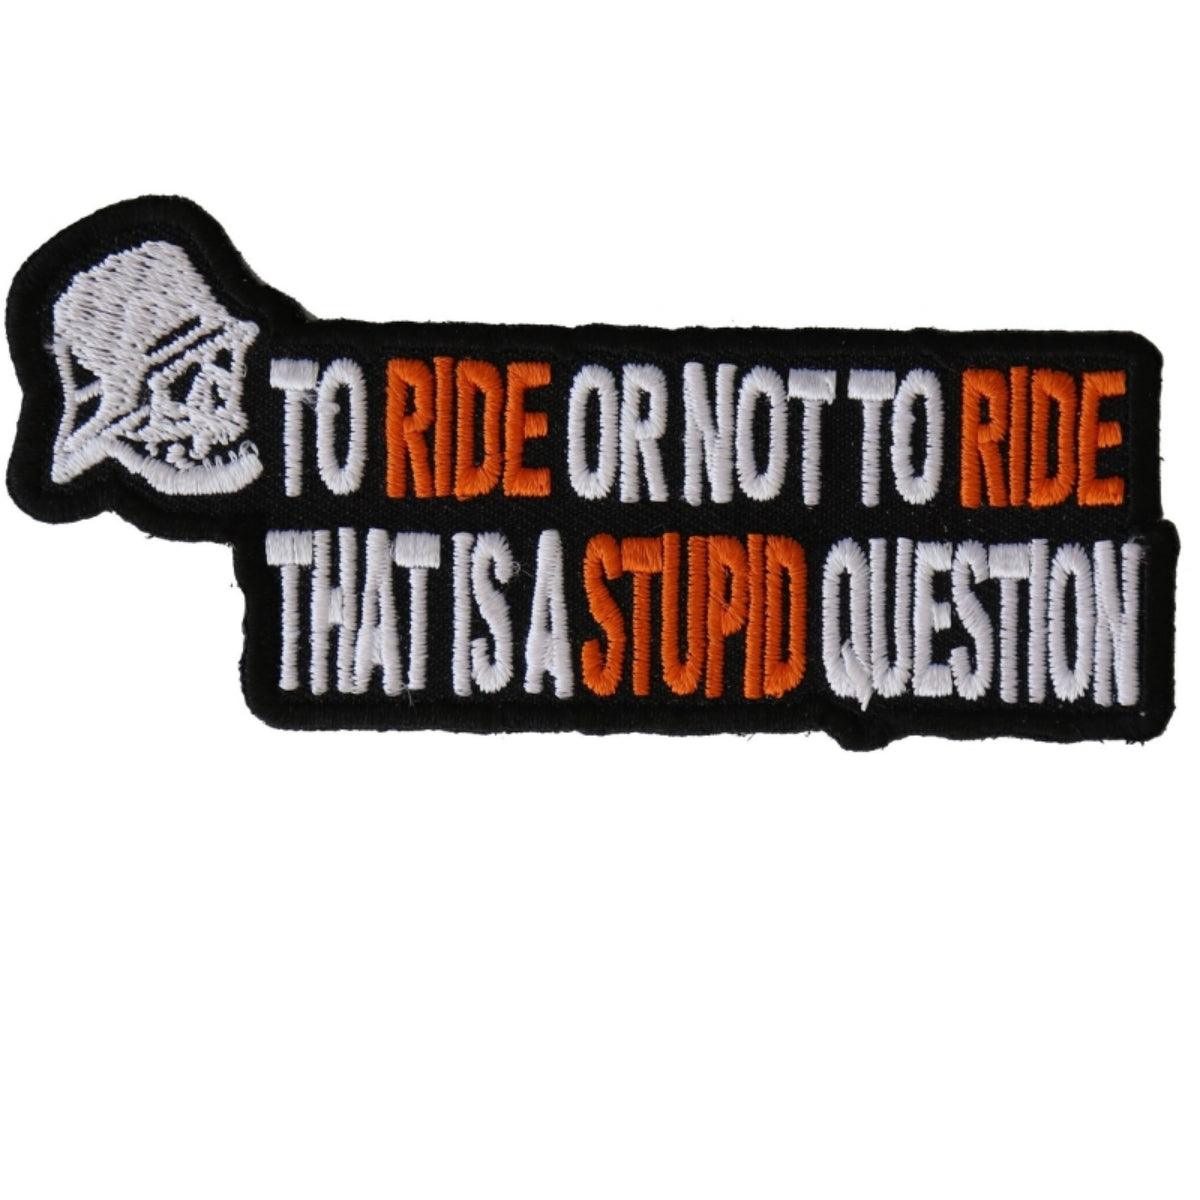 Daniel Smart To Ride or Not To Ride That's A Stupid Question Biker Embroidered Iron On Patch, 4 x 2 inches - American Legend Rider